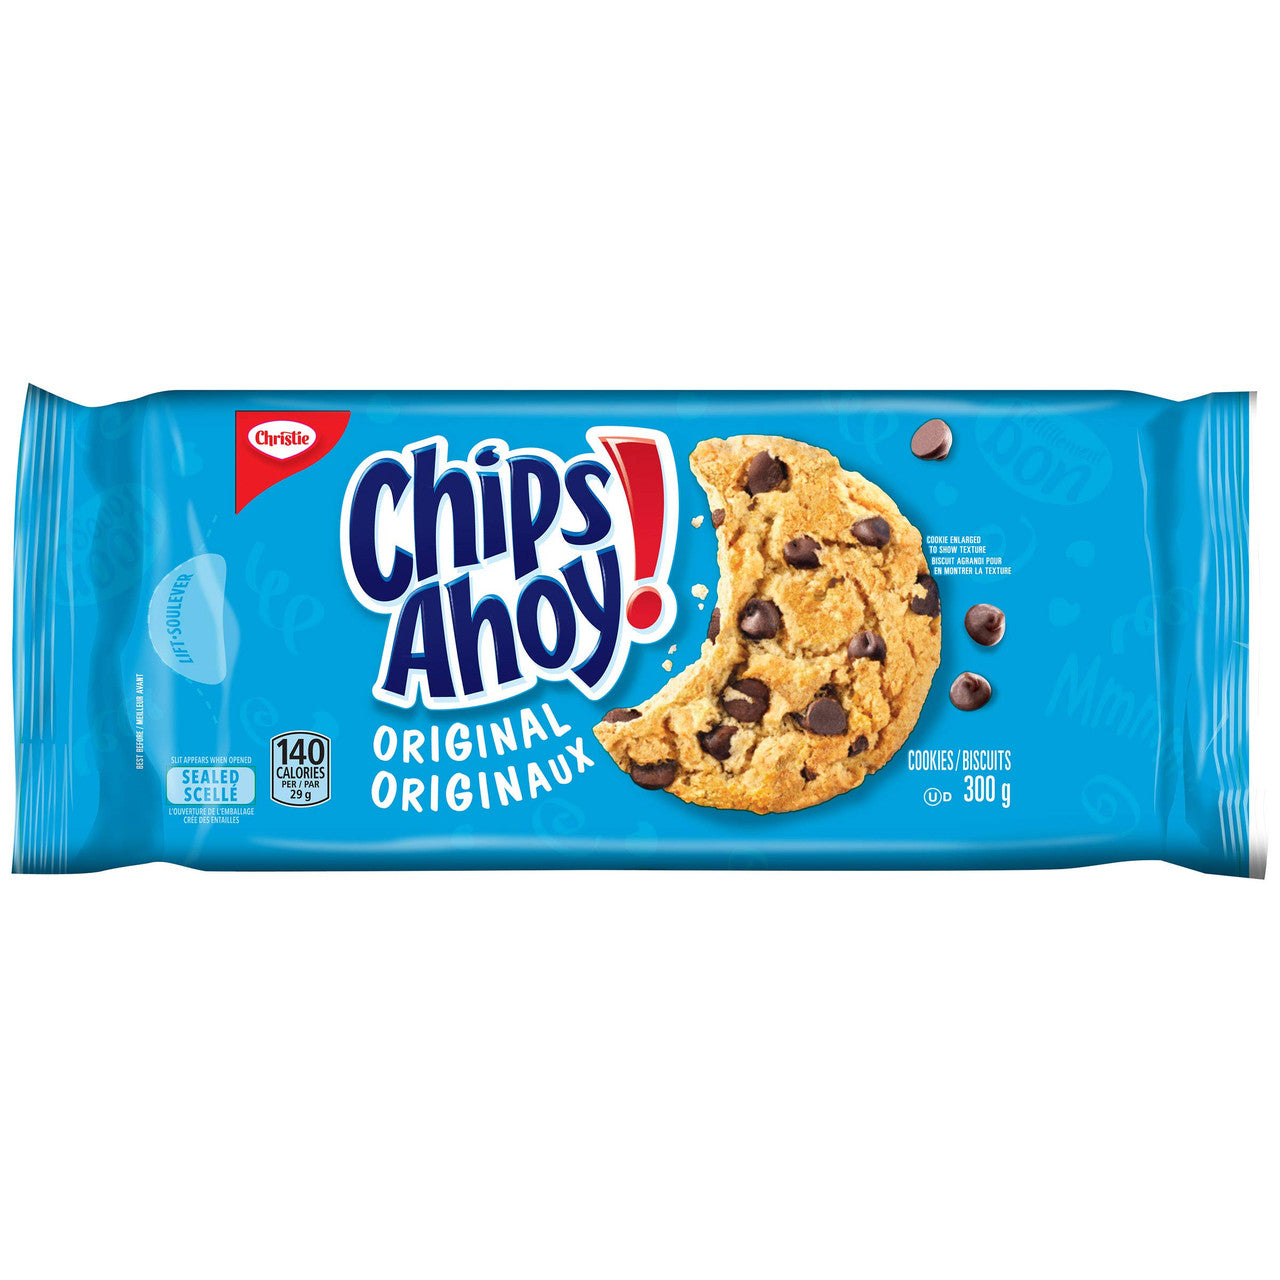 Chips Ahoy! Original Chocolate-Chip Cookies, 300g/10.6oz. (Imported from Canada)